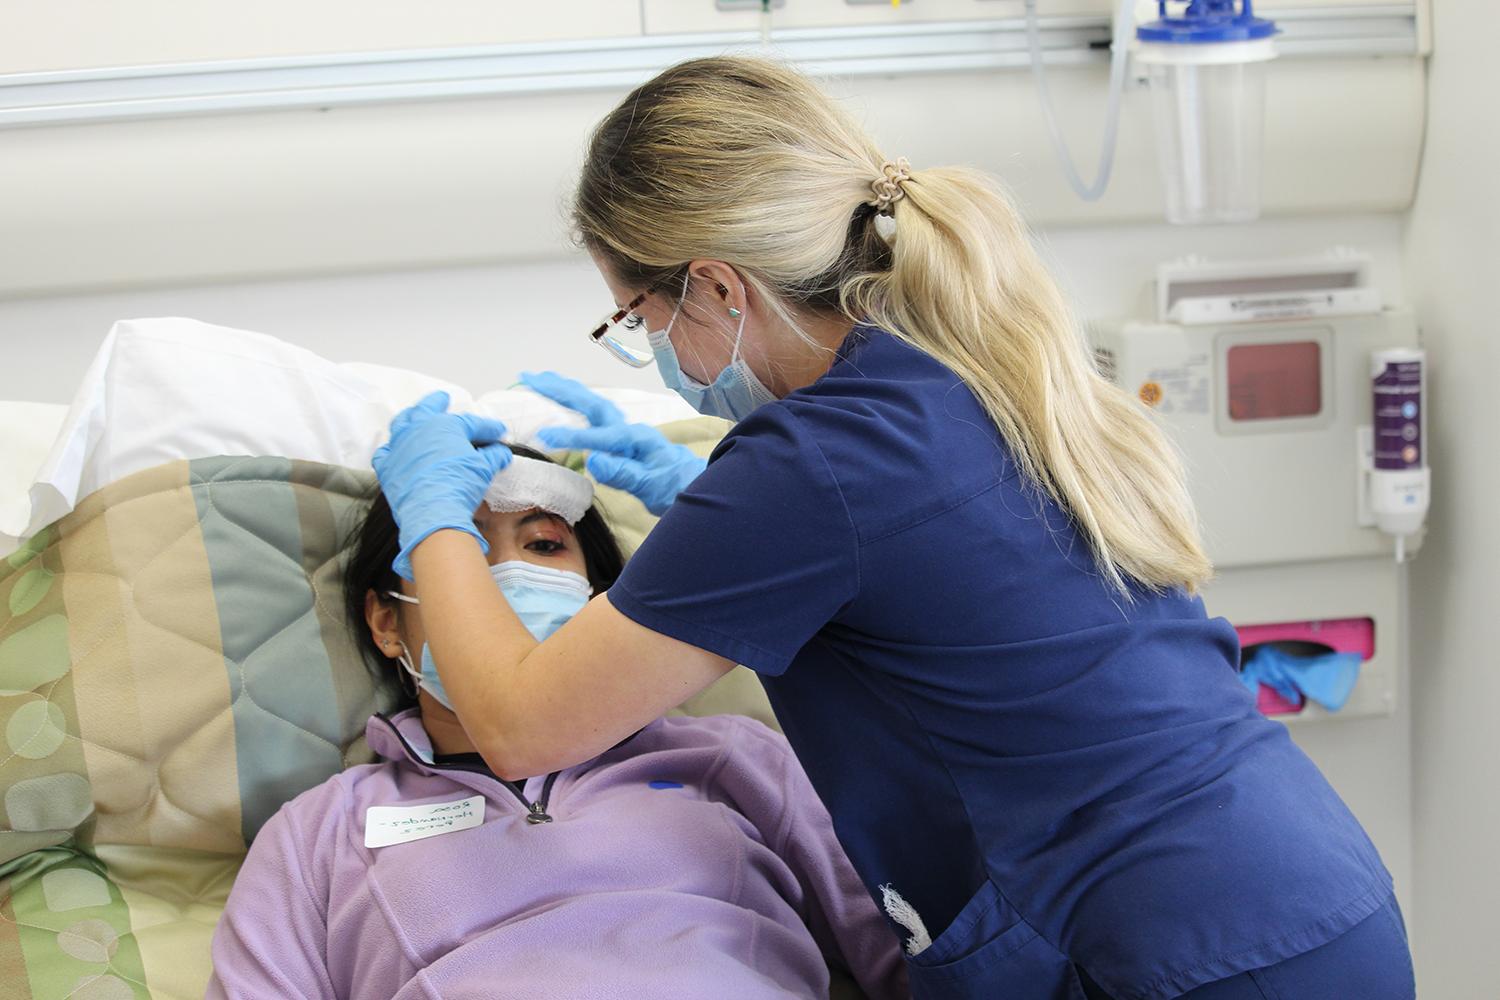 nursing student works on a patient with a mock injury